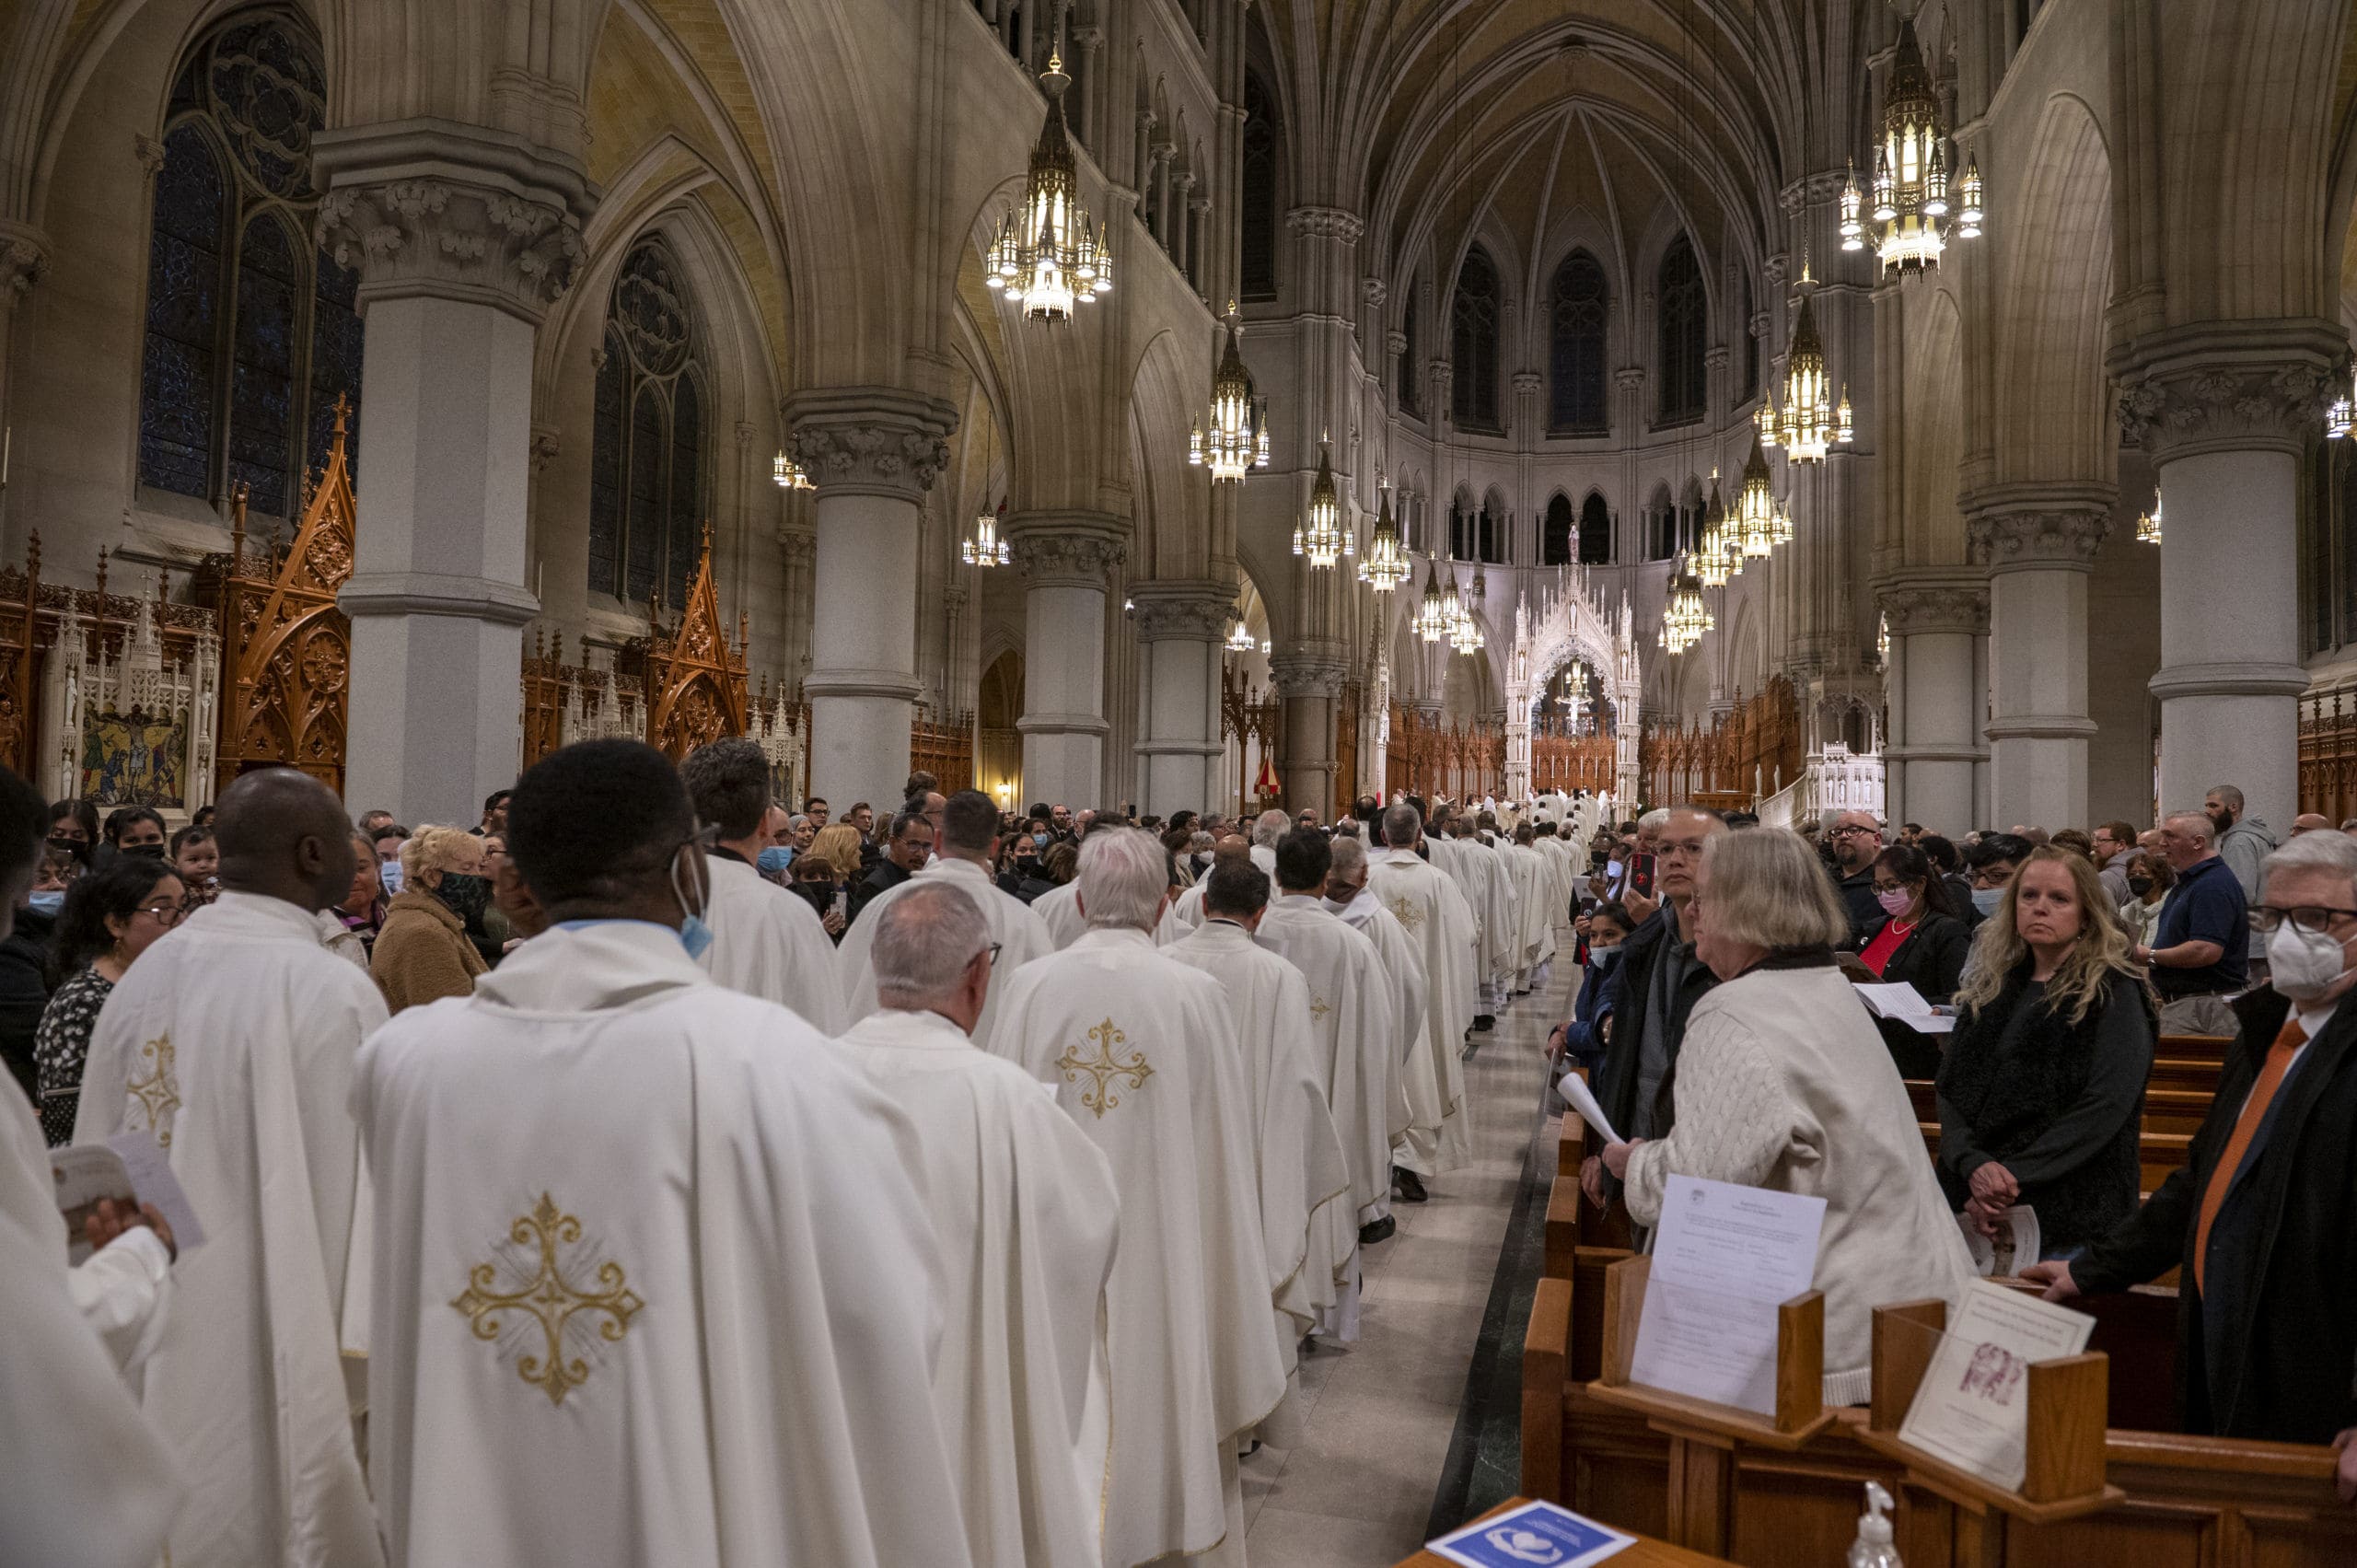 Cardinal Joseph W. Tobin, C.Ss.R., celebrated the Chrism Mass at the Cathedral Basilica of the Sacred Heart in Newark on April 11 with auxiliary bishops, priests, deacons, consecrated religious and lay faithful of the Archdiocese of Newark. (By Julio Eduardo for the Archdiocese of Newark).